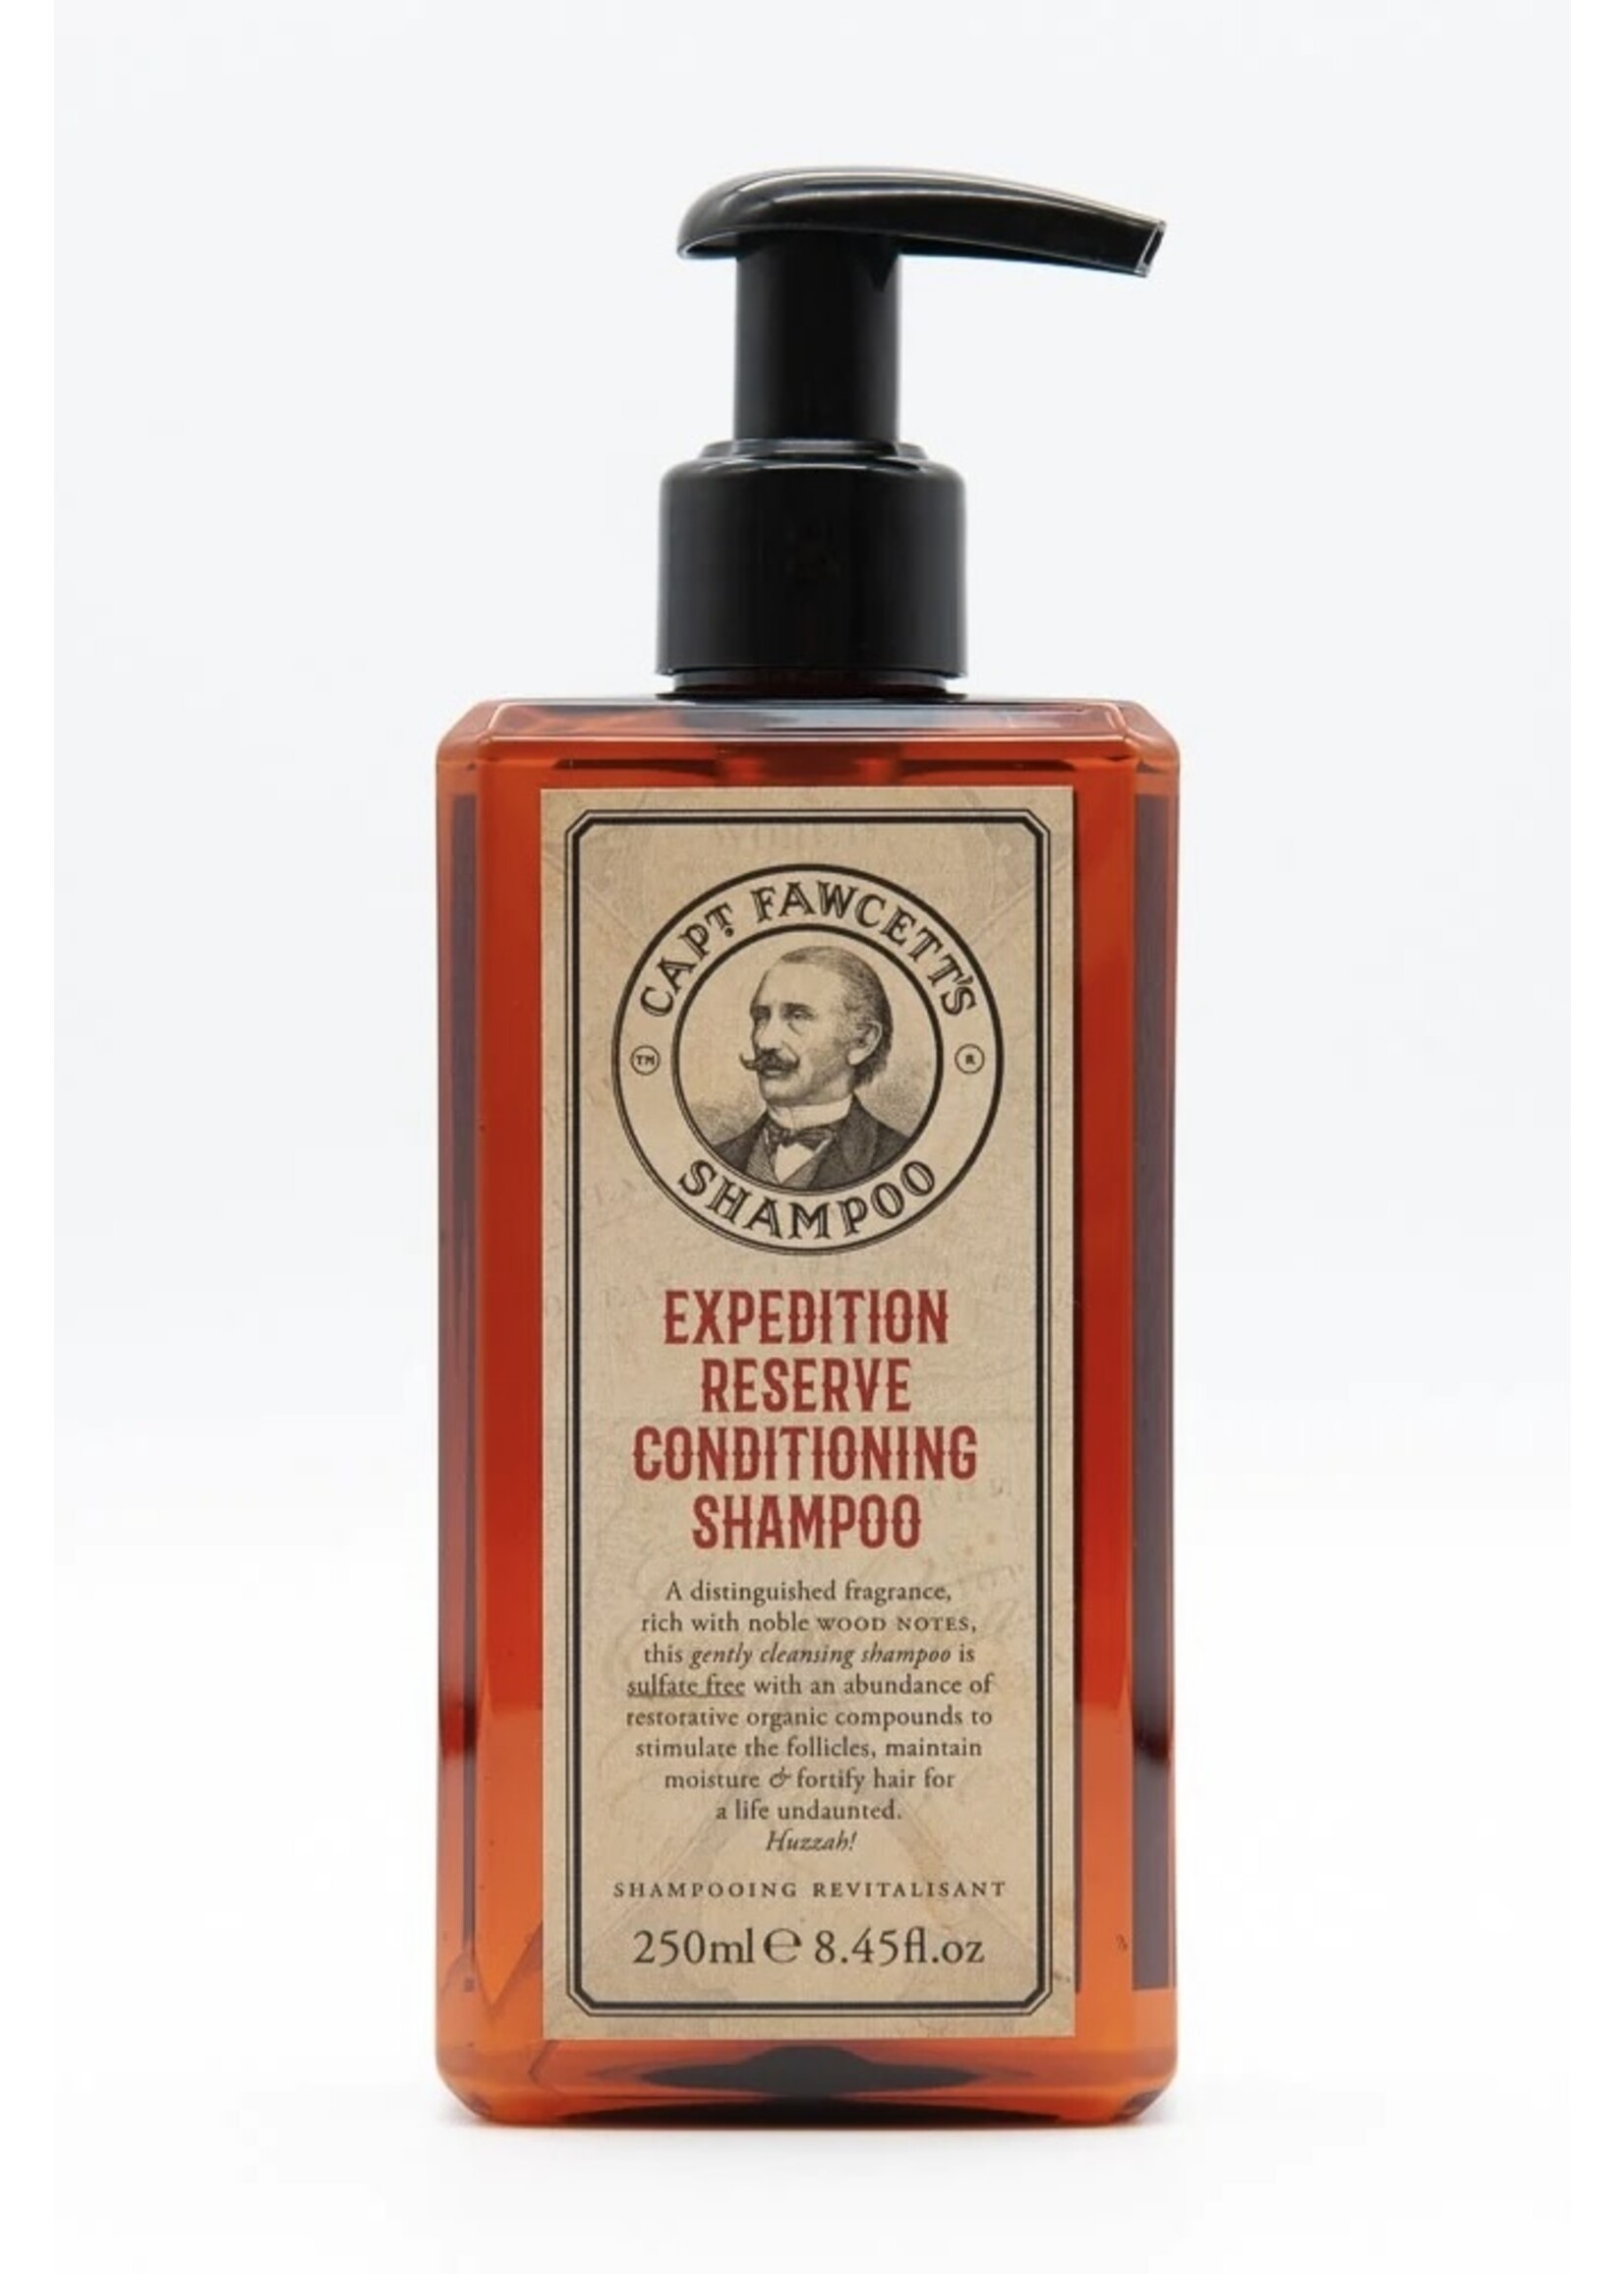 CAPTAIN FAWCETT Expedition Reserve Conditioning Shampoo